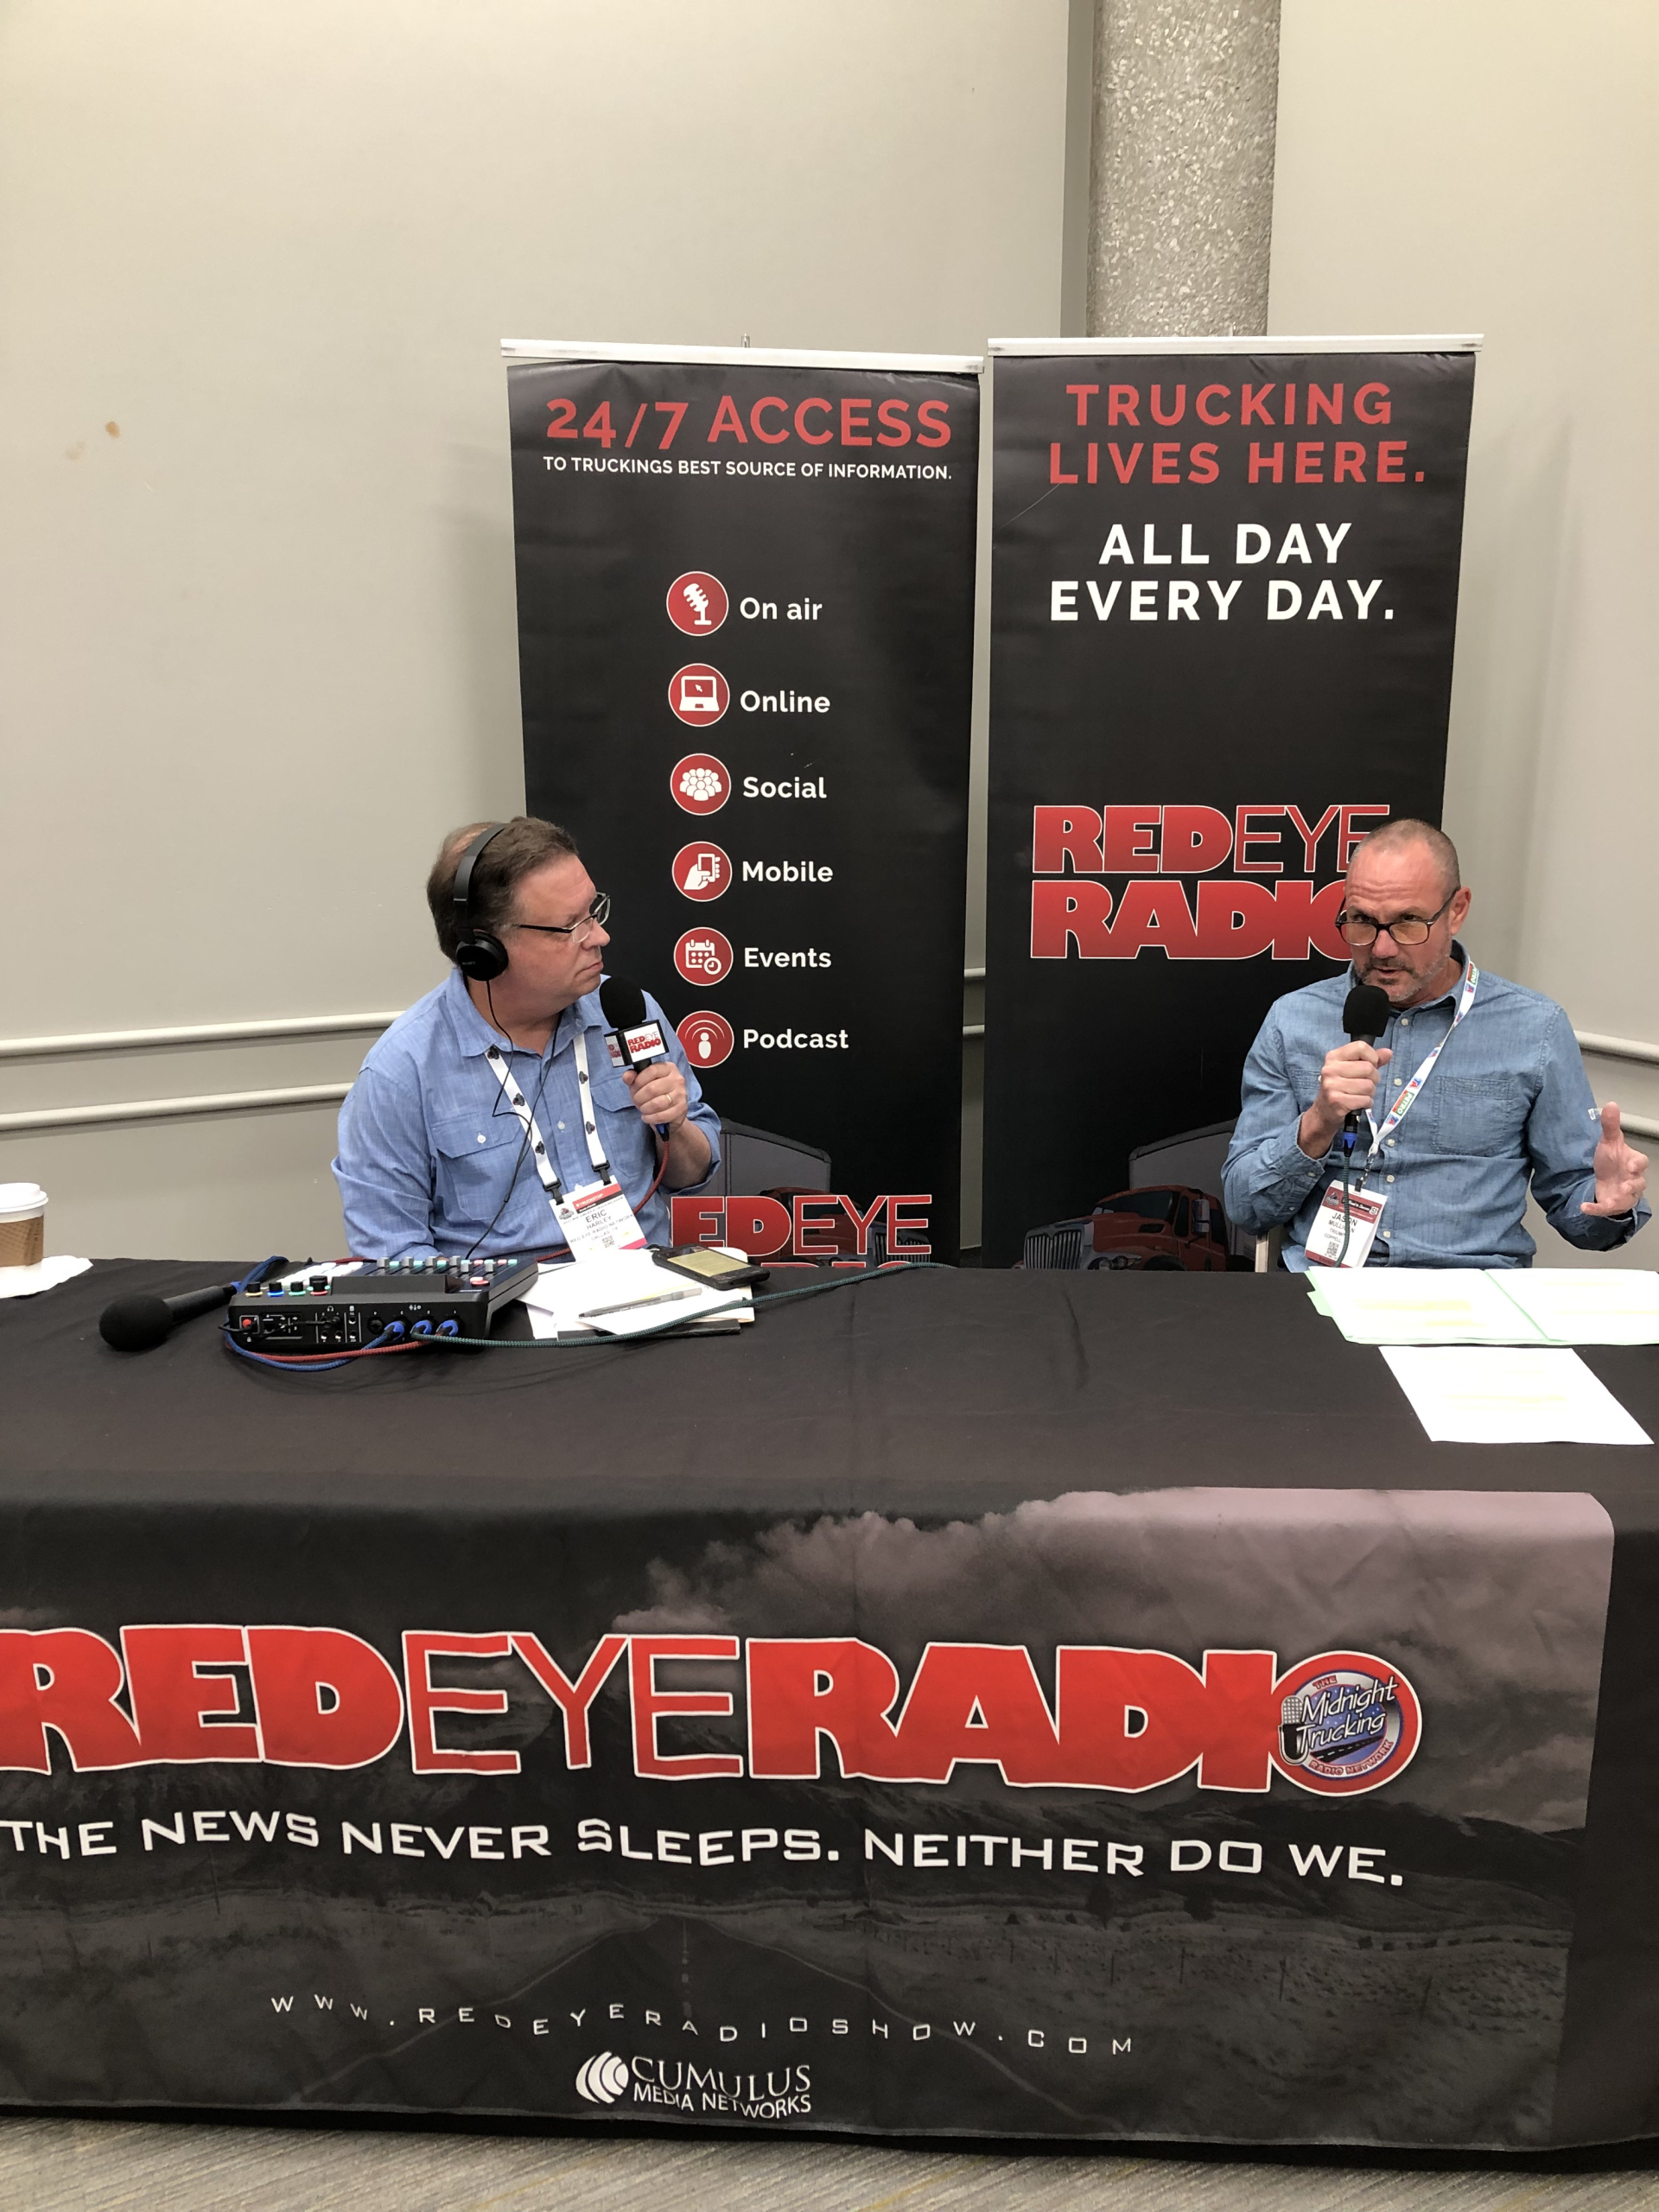 Eric Harley talks to Jason Mullican, SVP Channel Marketing at Triumph while at MATS 2023.  Triumph is more than factoring company, it is the Owner Operator’s Business Partner.